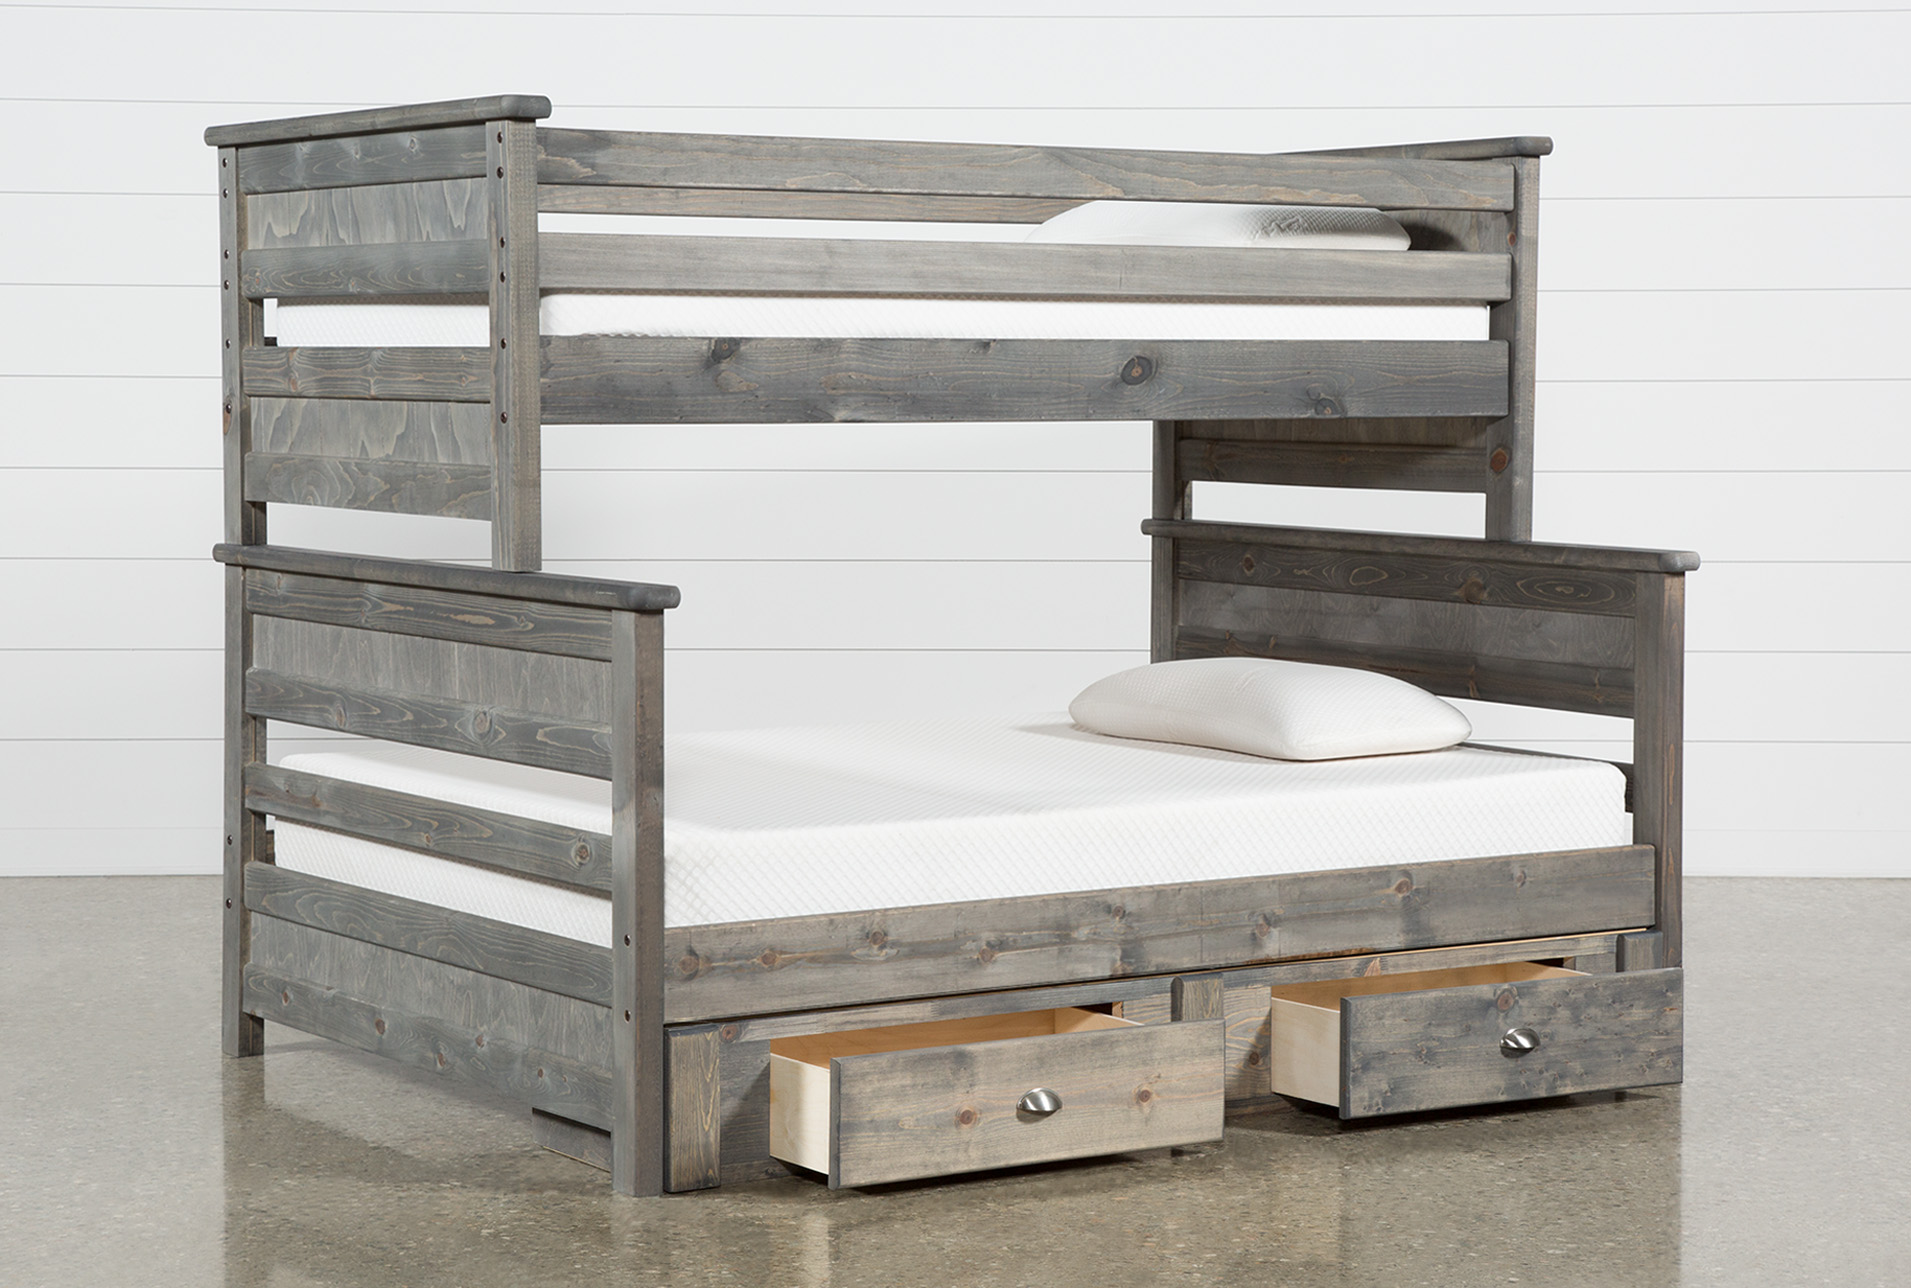 wooden bunk beds with shelves